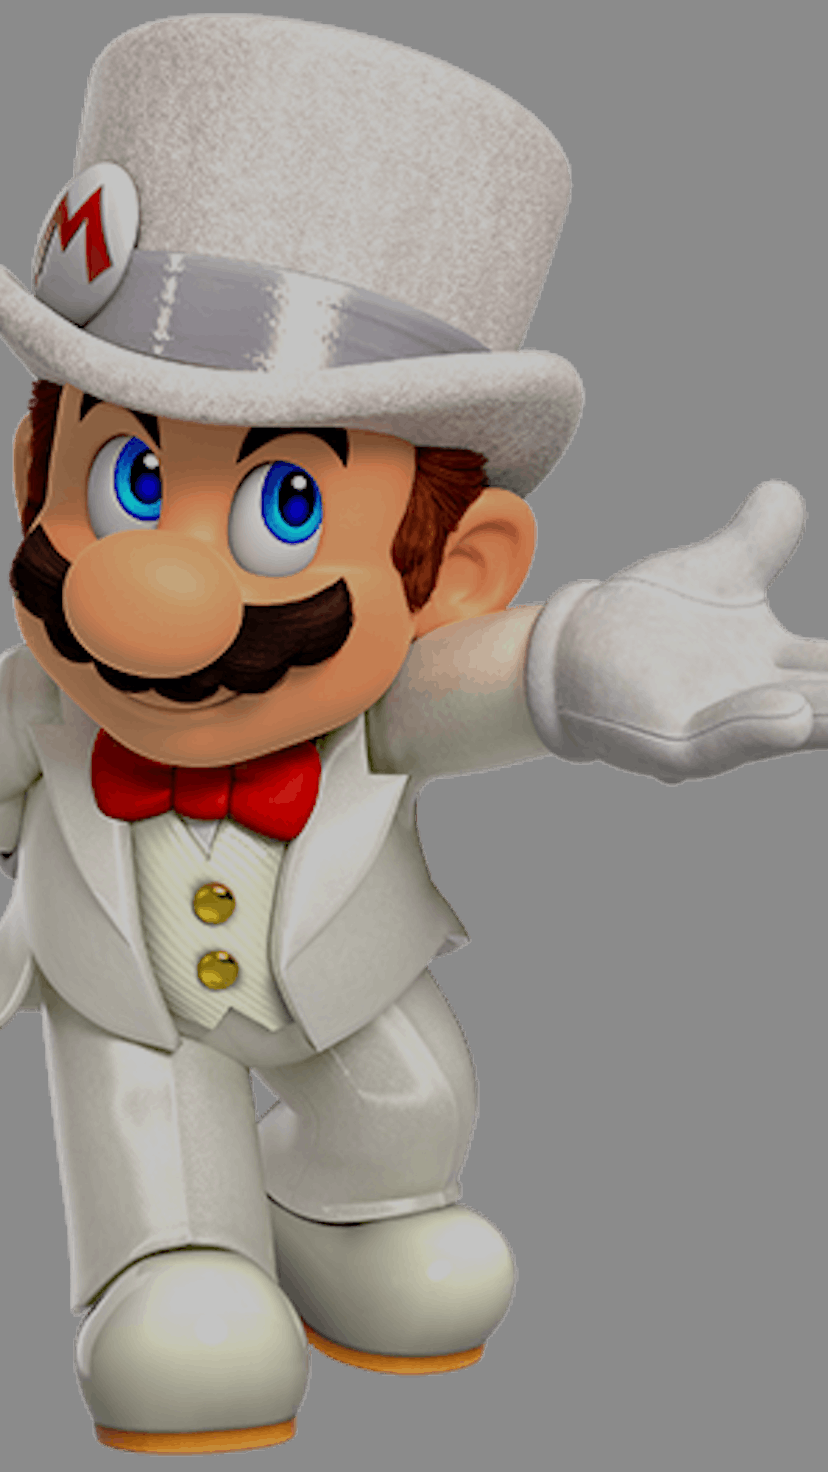 Mario in white suit. Ray tracing. Video games. PC. Gaming. Games. Nintendo.